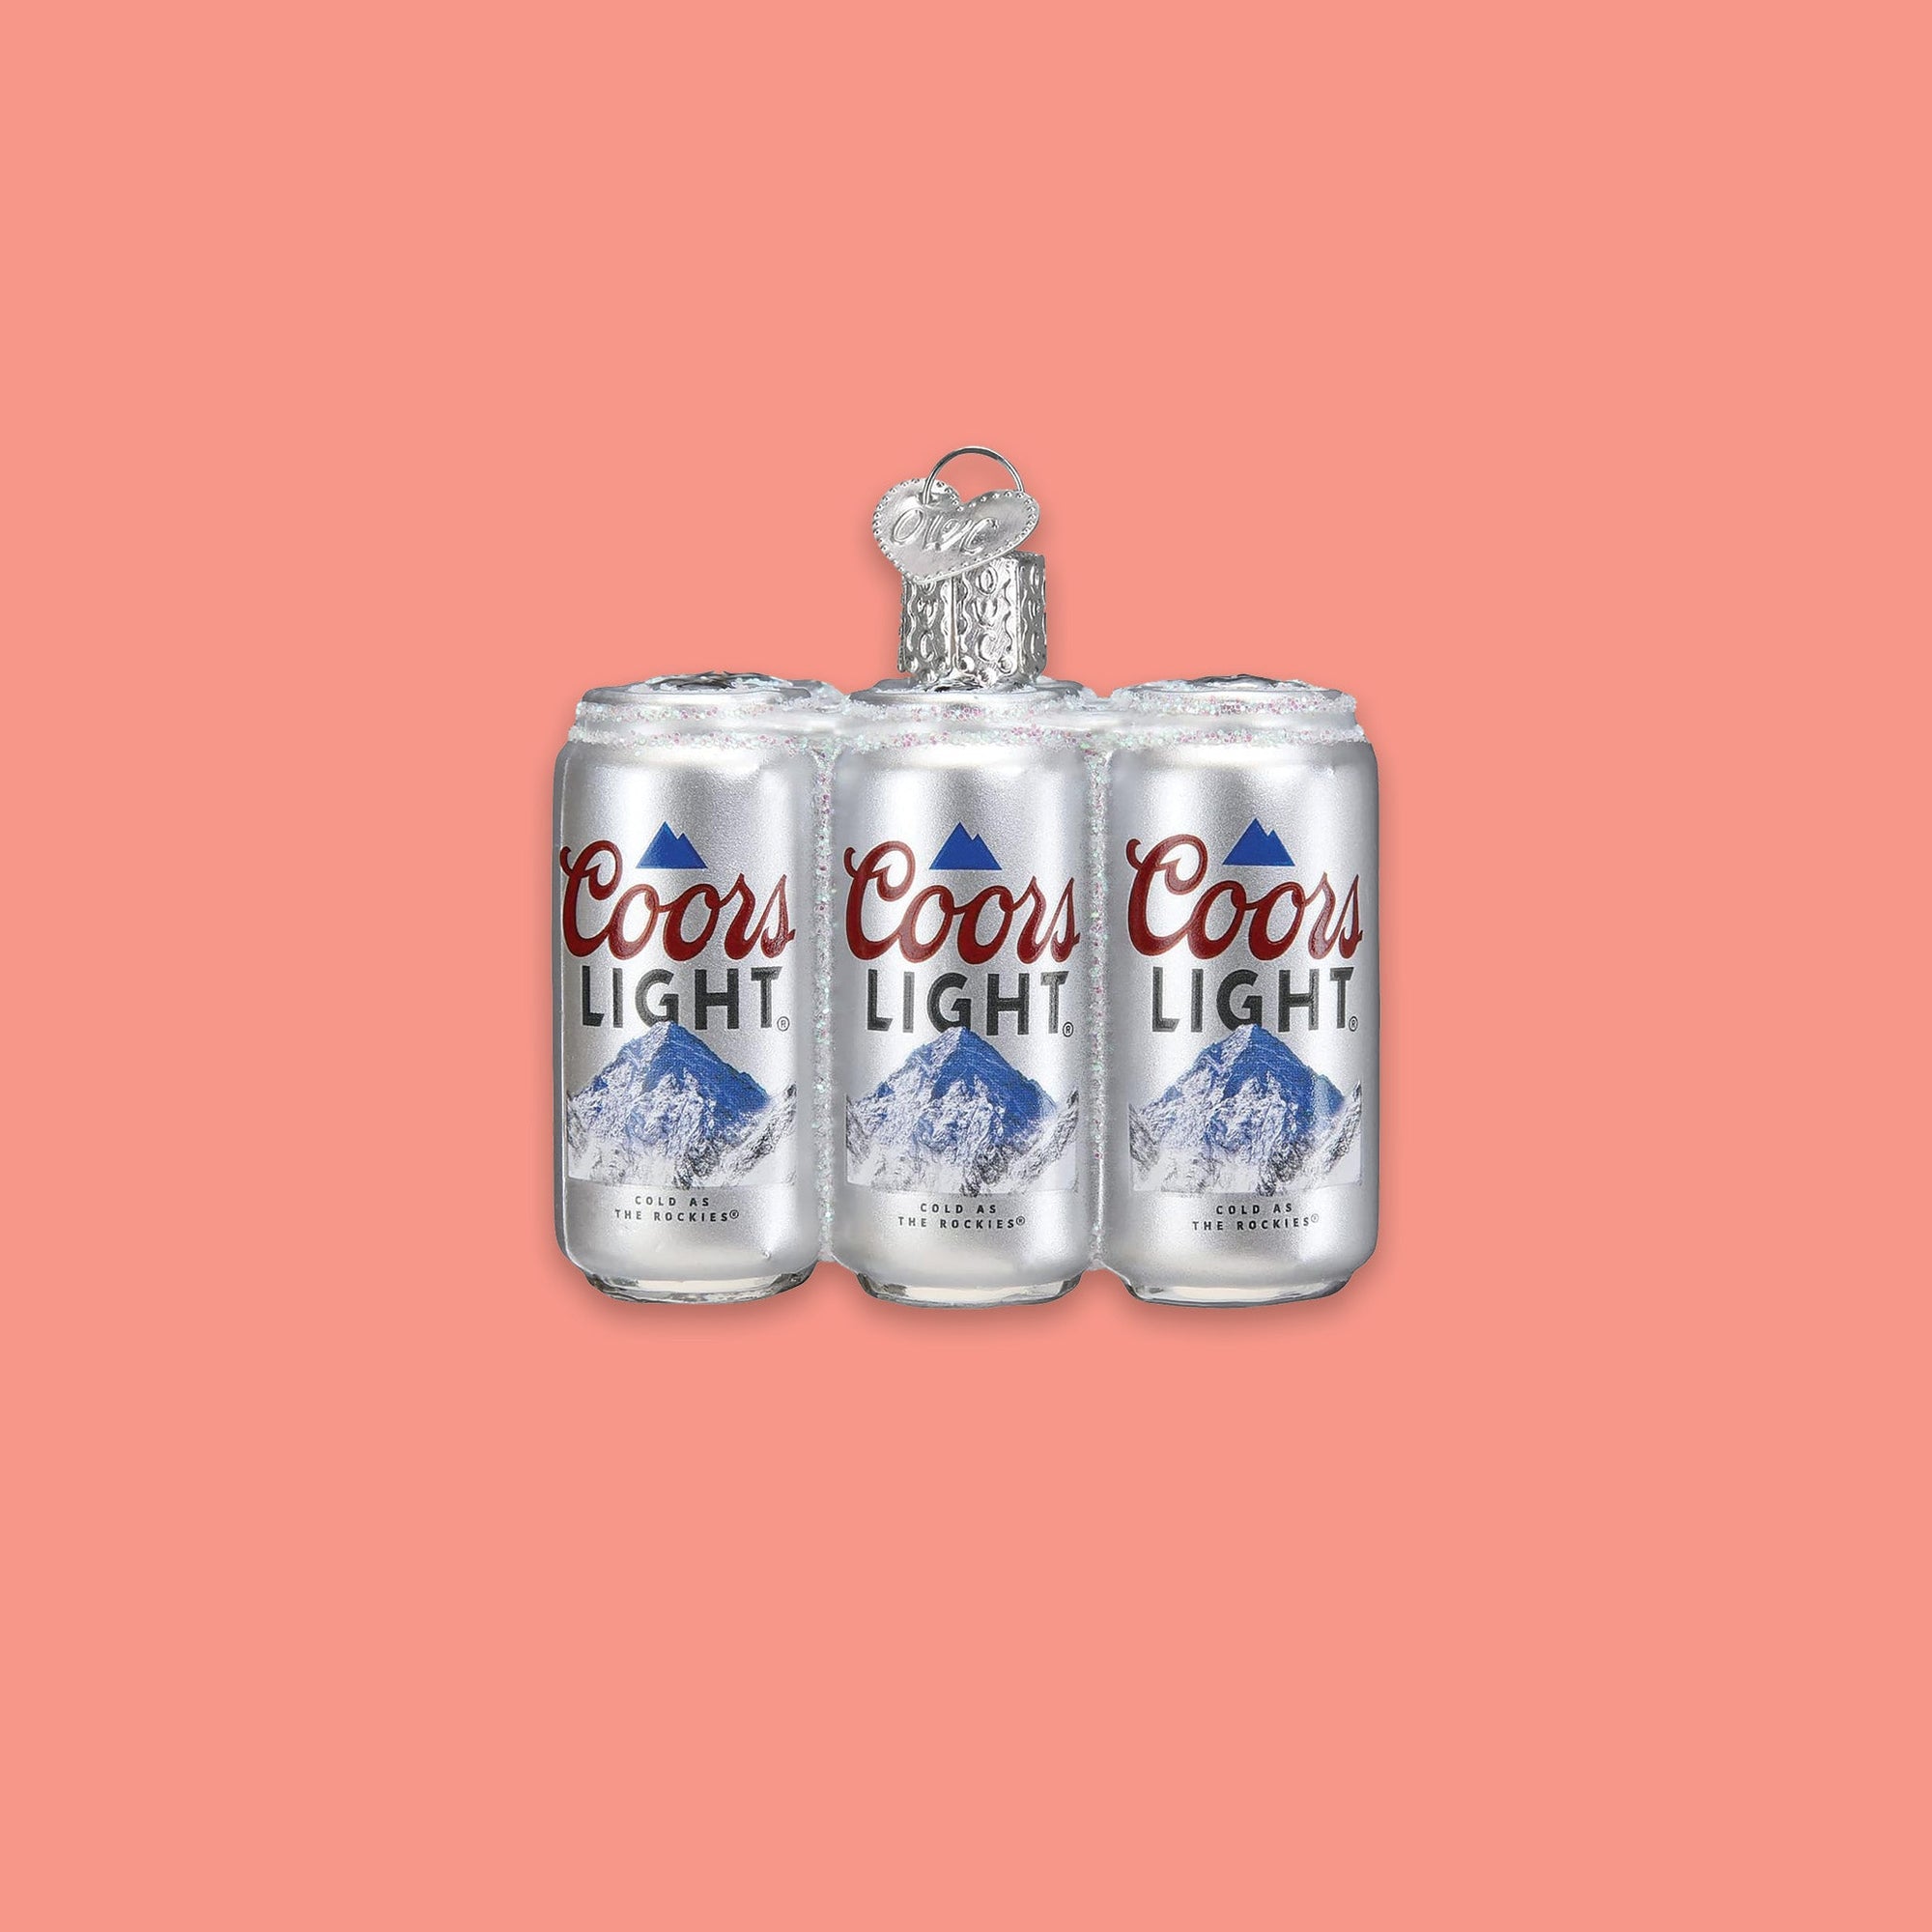 On a coral pink background sits a six pack of cans ornament. This is a glass 'Coors Light' six pack ornament.